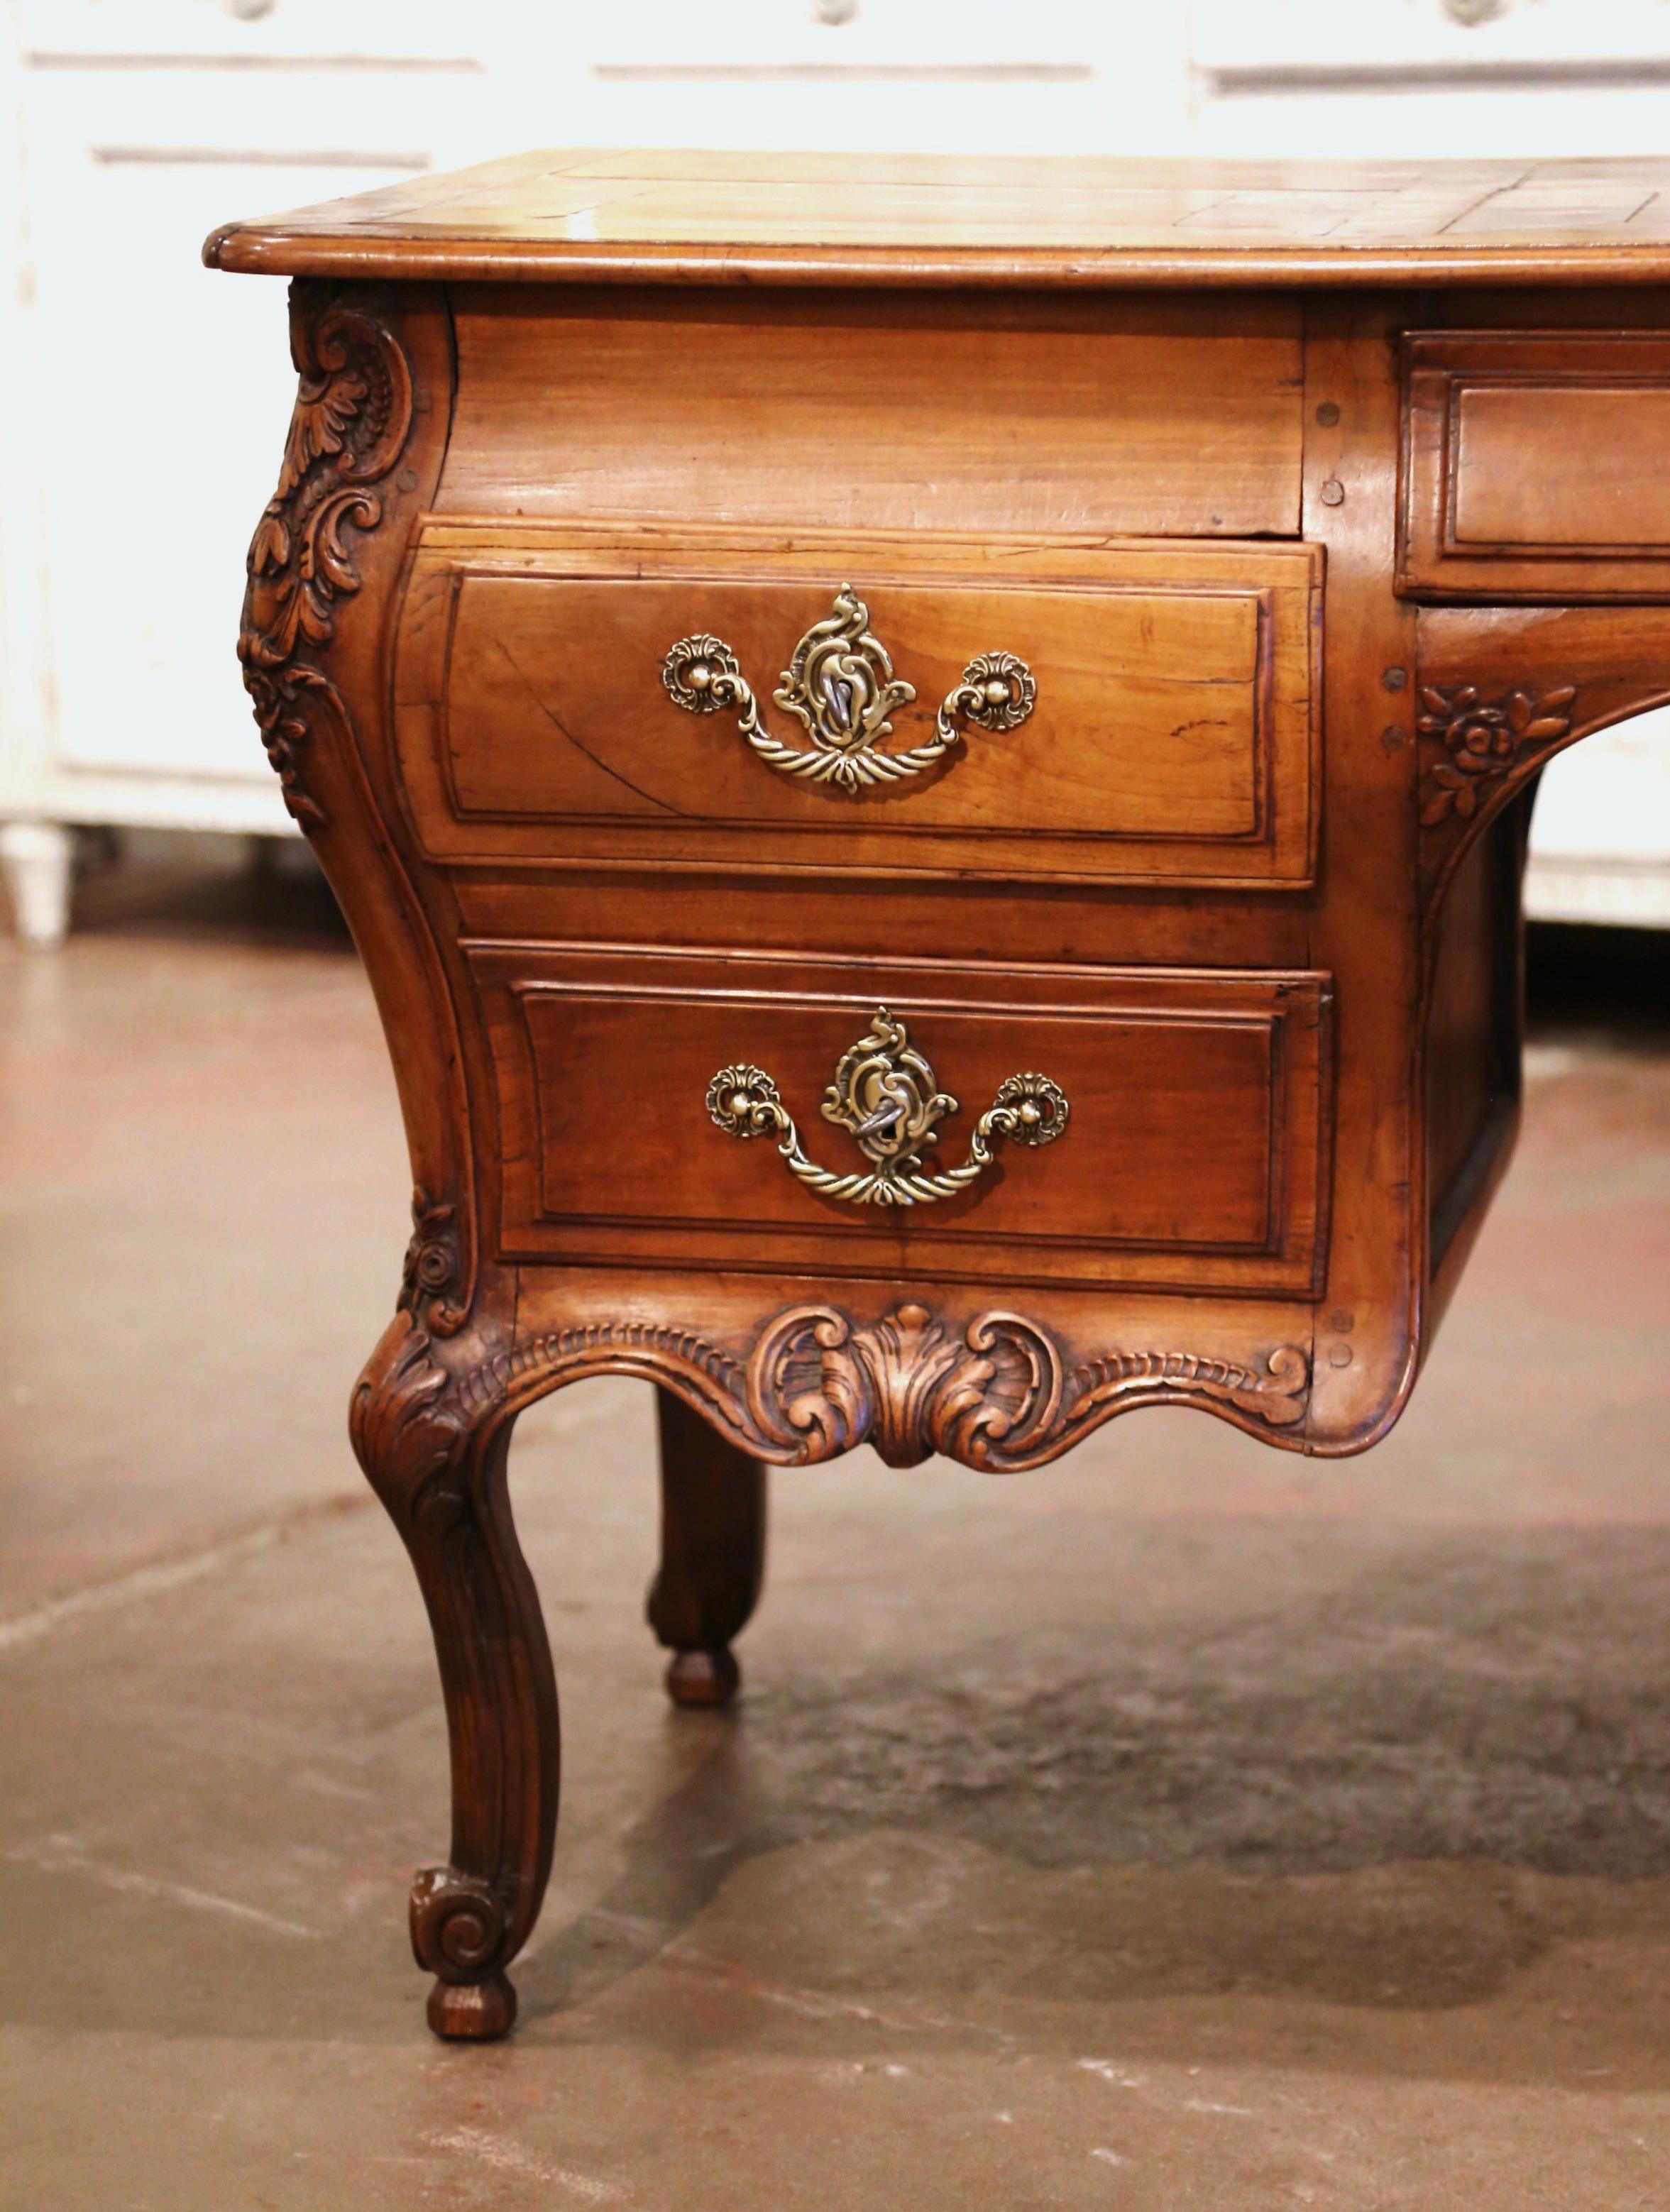 18th Century French Louis XV Carved Serpentine Cherry Desk with Parquetry Top For Sale 4